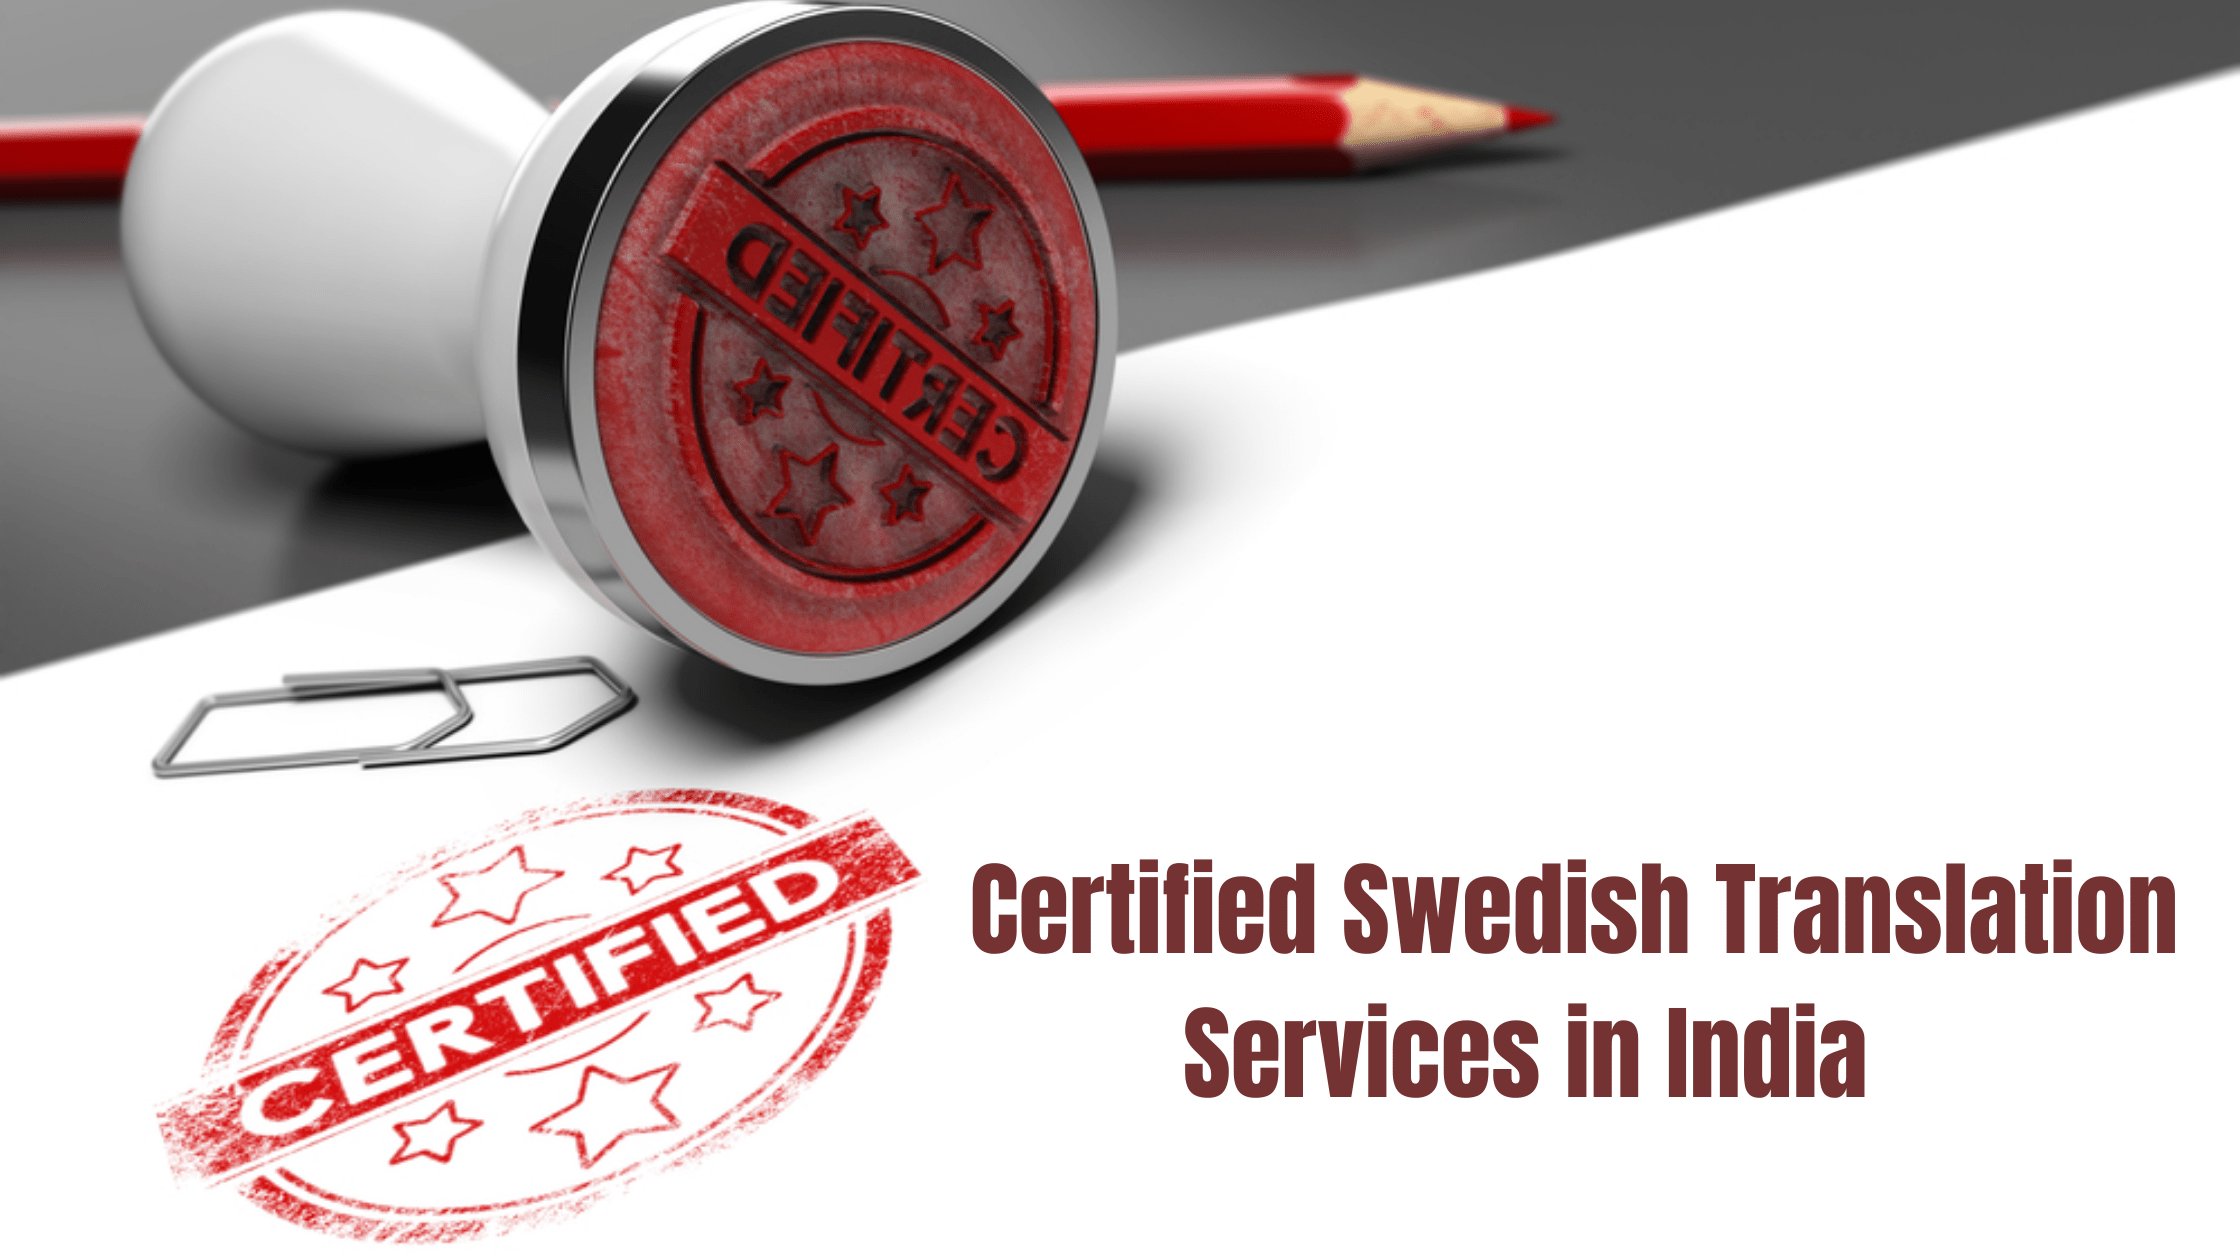 Certified Swedish Translation Services in India